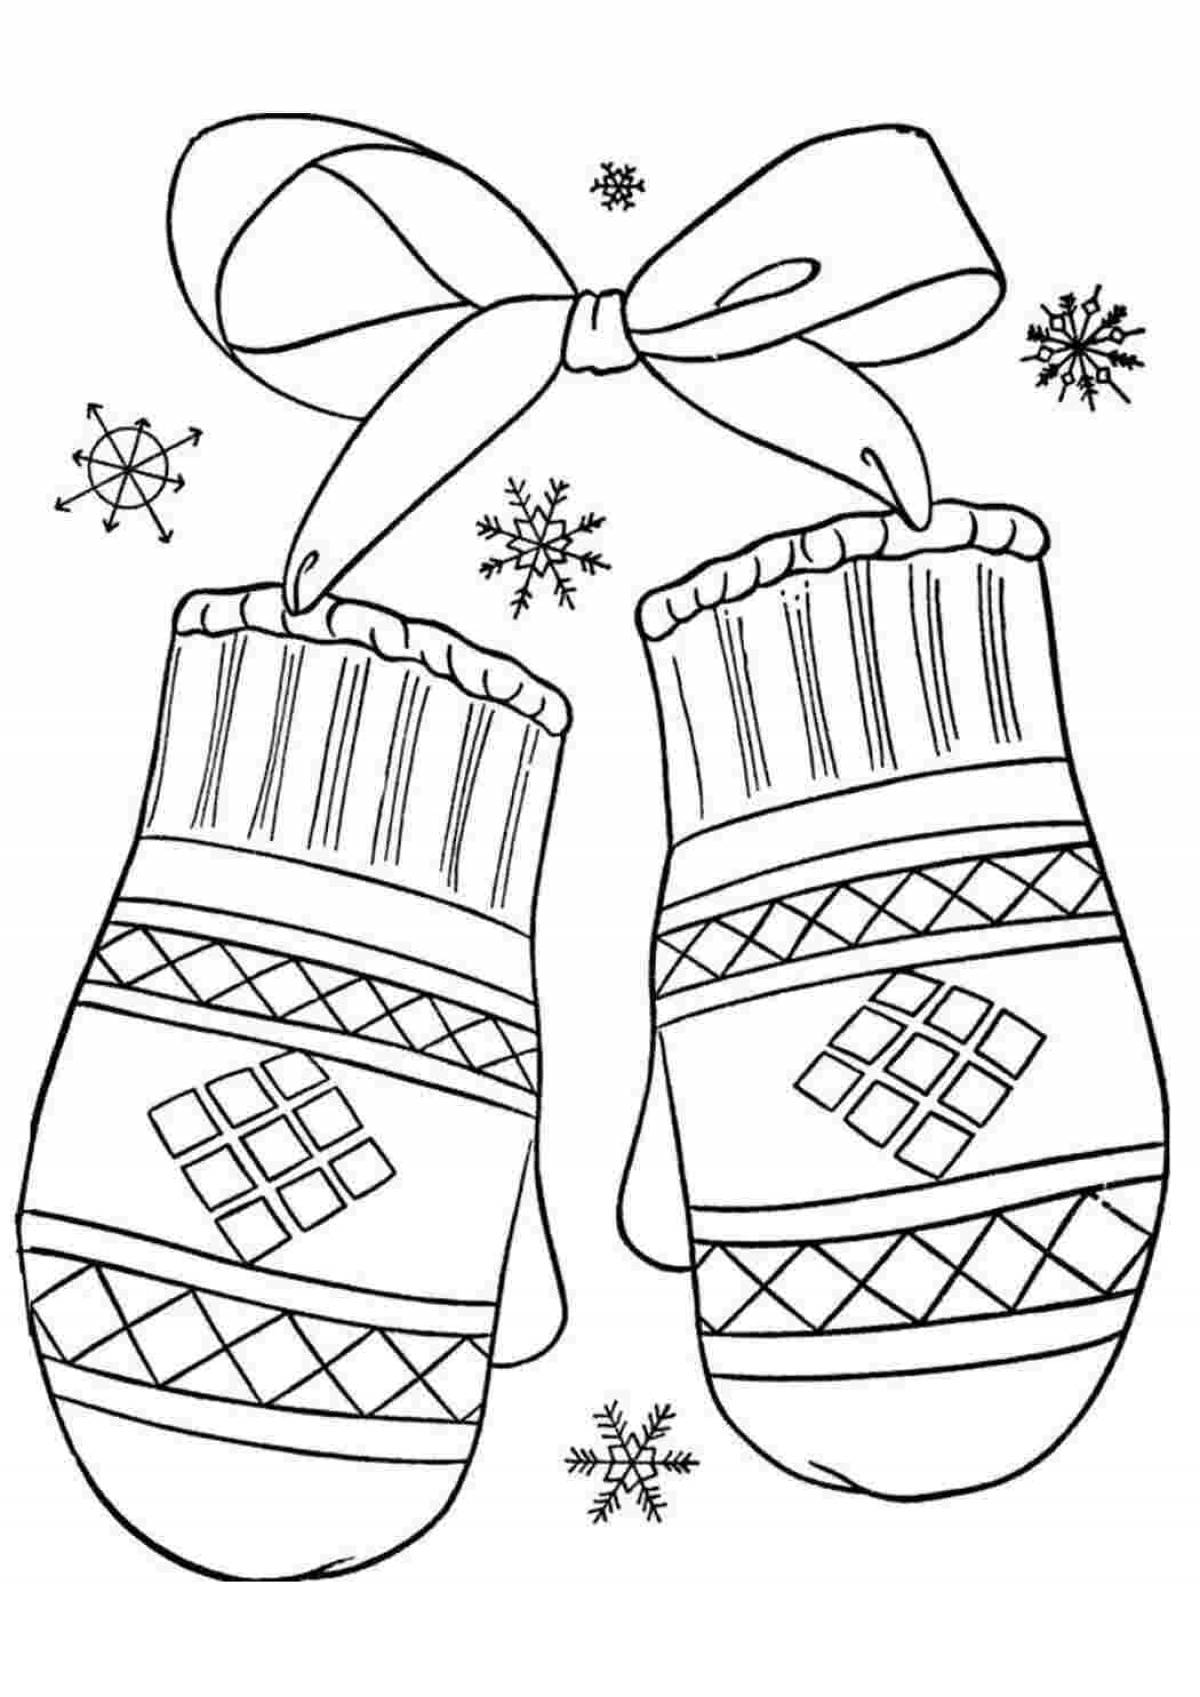 Coloring book exquisite patterned mitten